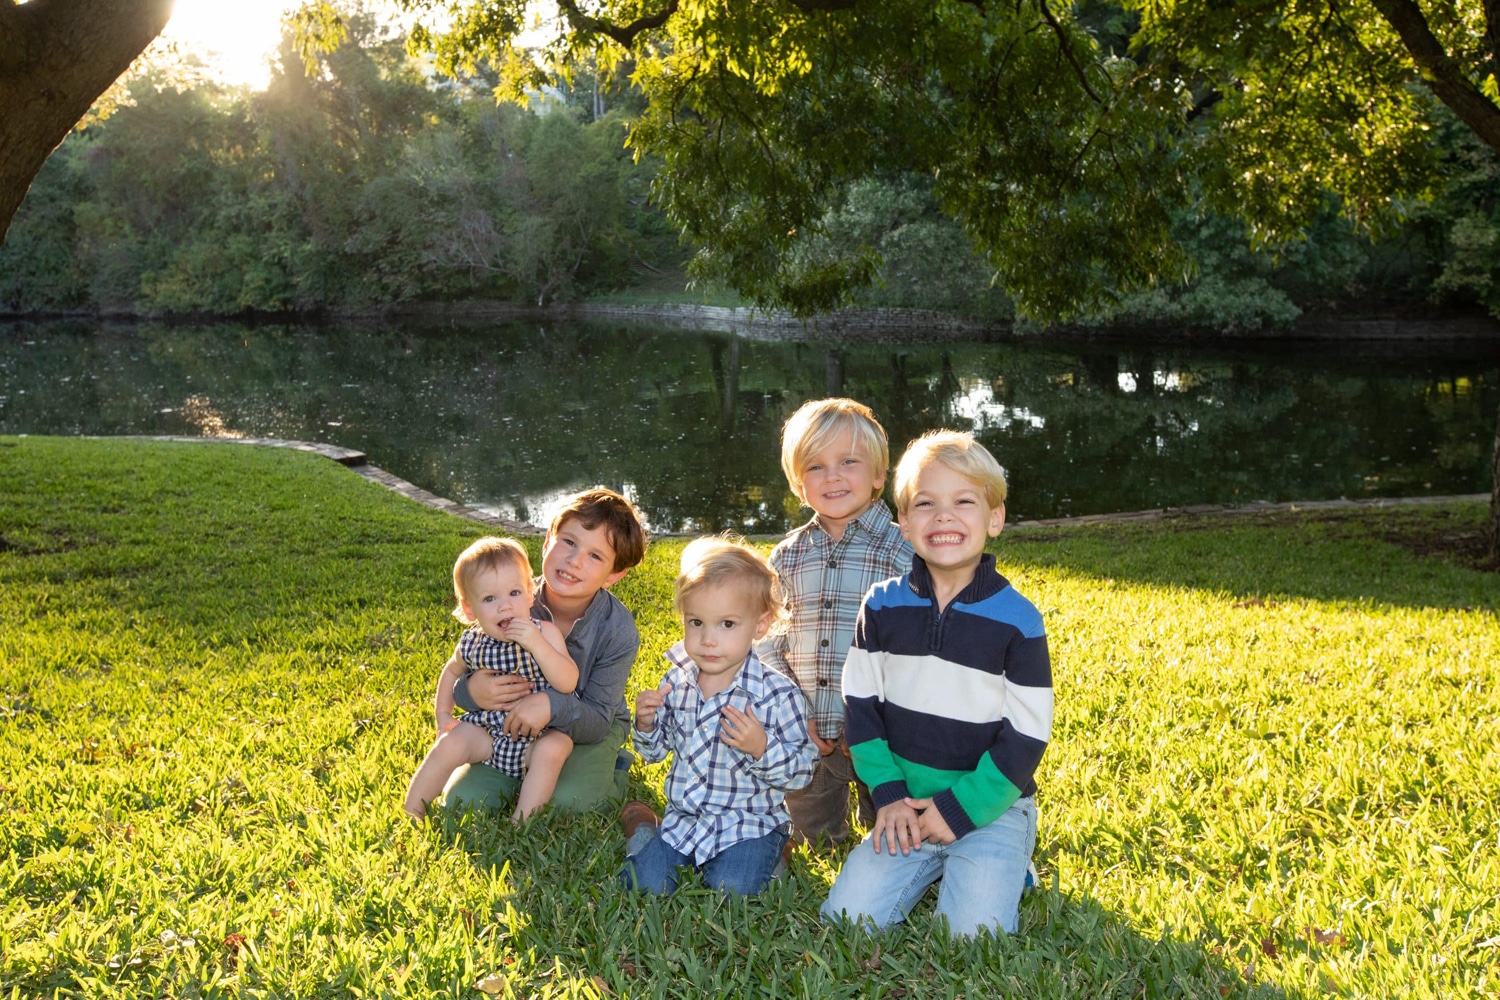 A group of siblings take a photo outside on the grass.